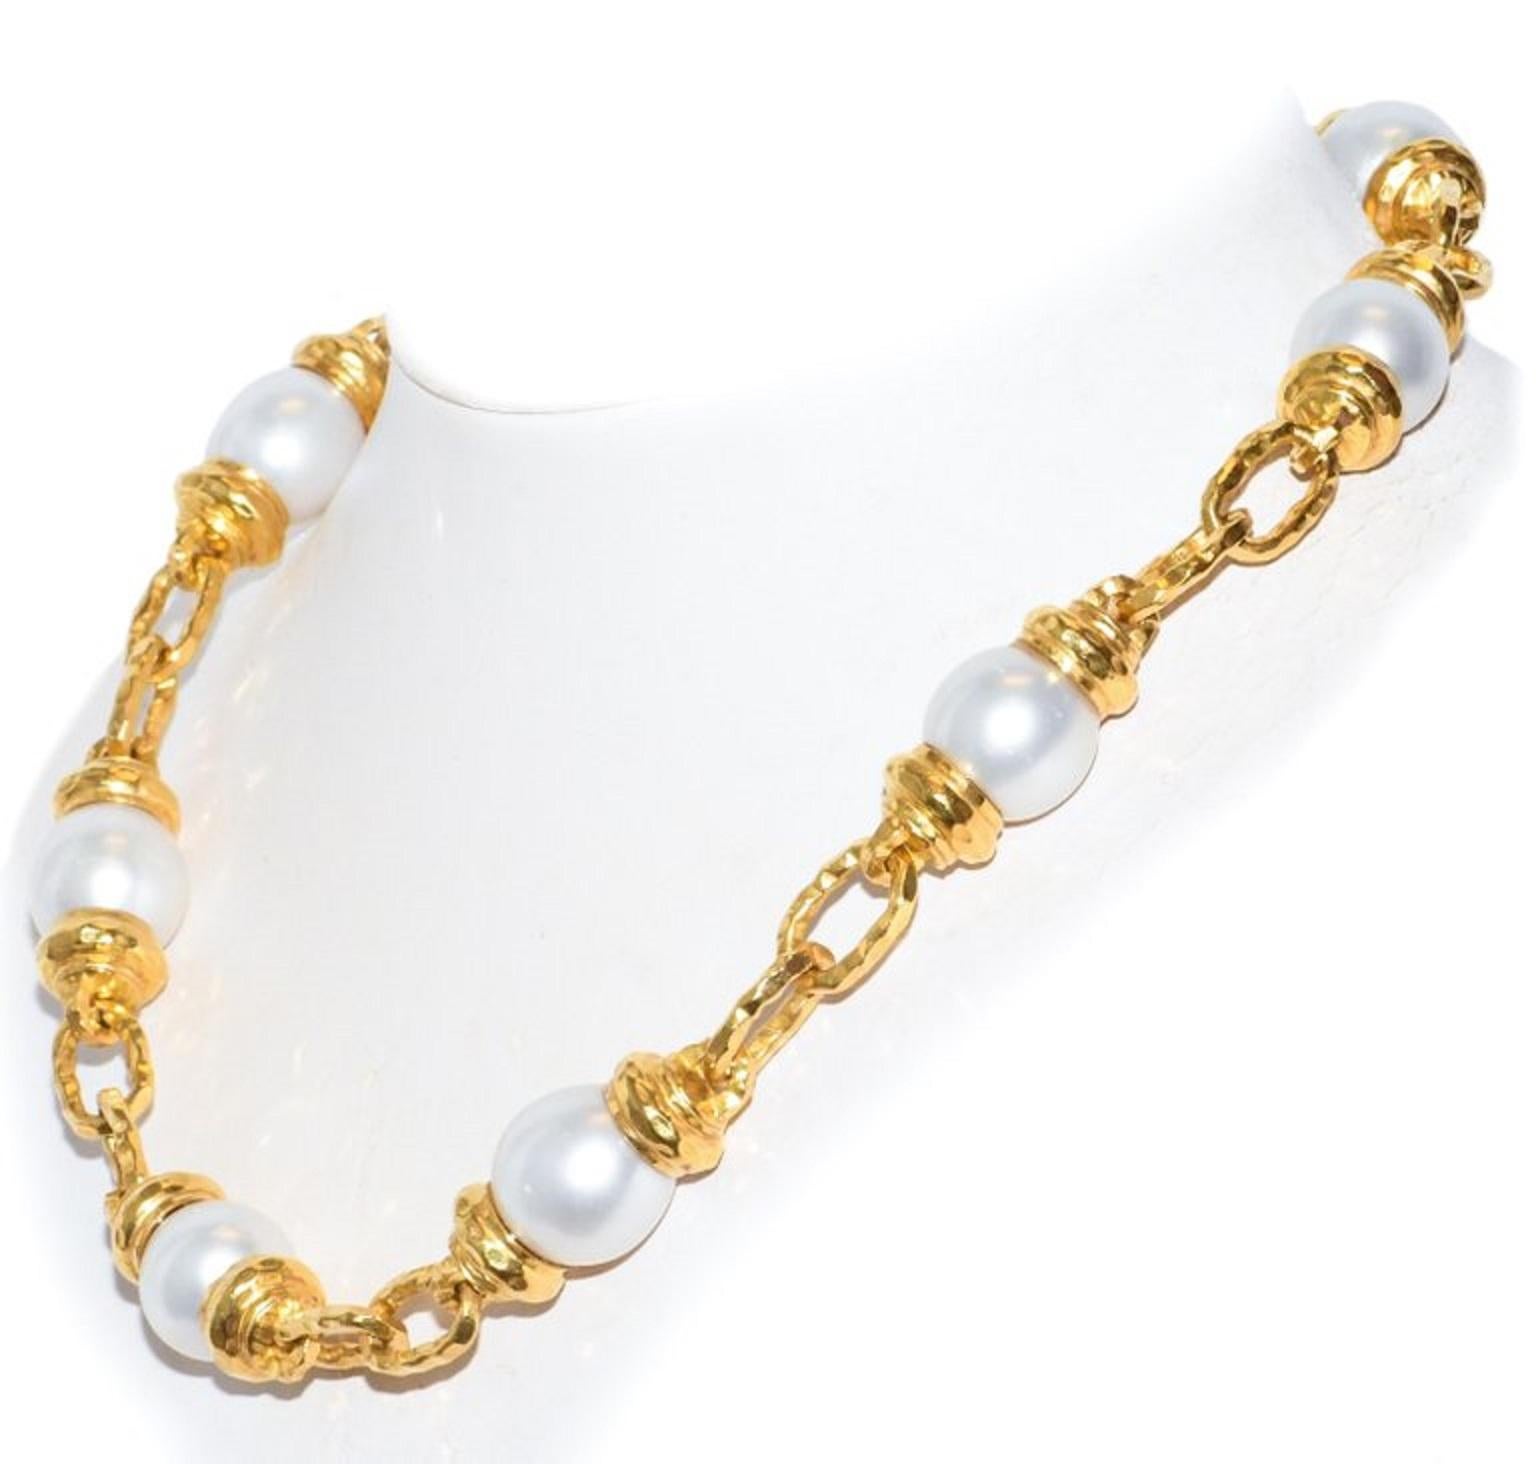 Migliore, Ltd. in Atlanta is famous for their hand fabricated creations.  This stunning one of a kind necklace is a prime example of their craft.  Featuring 8 South Sea pearls measure 14mm - 15.5mm with wonderful luster, this stunning piece weighs